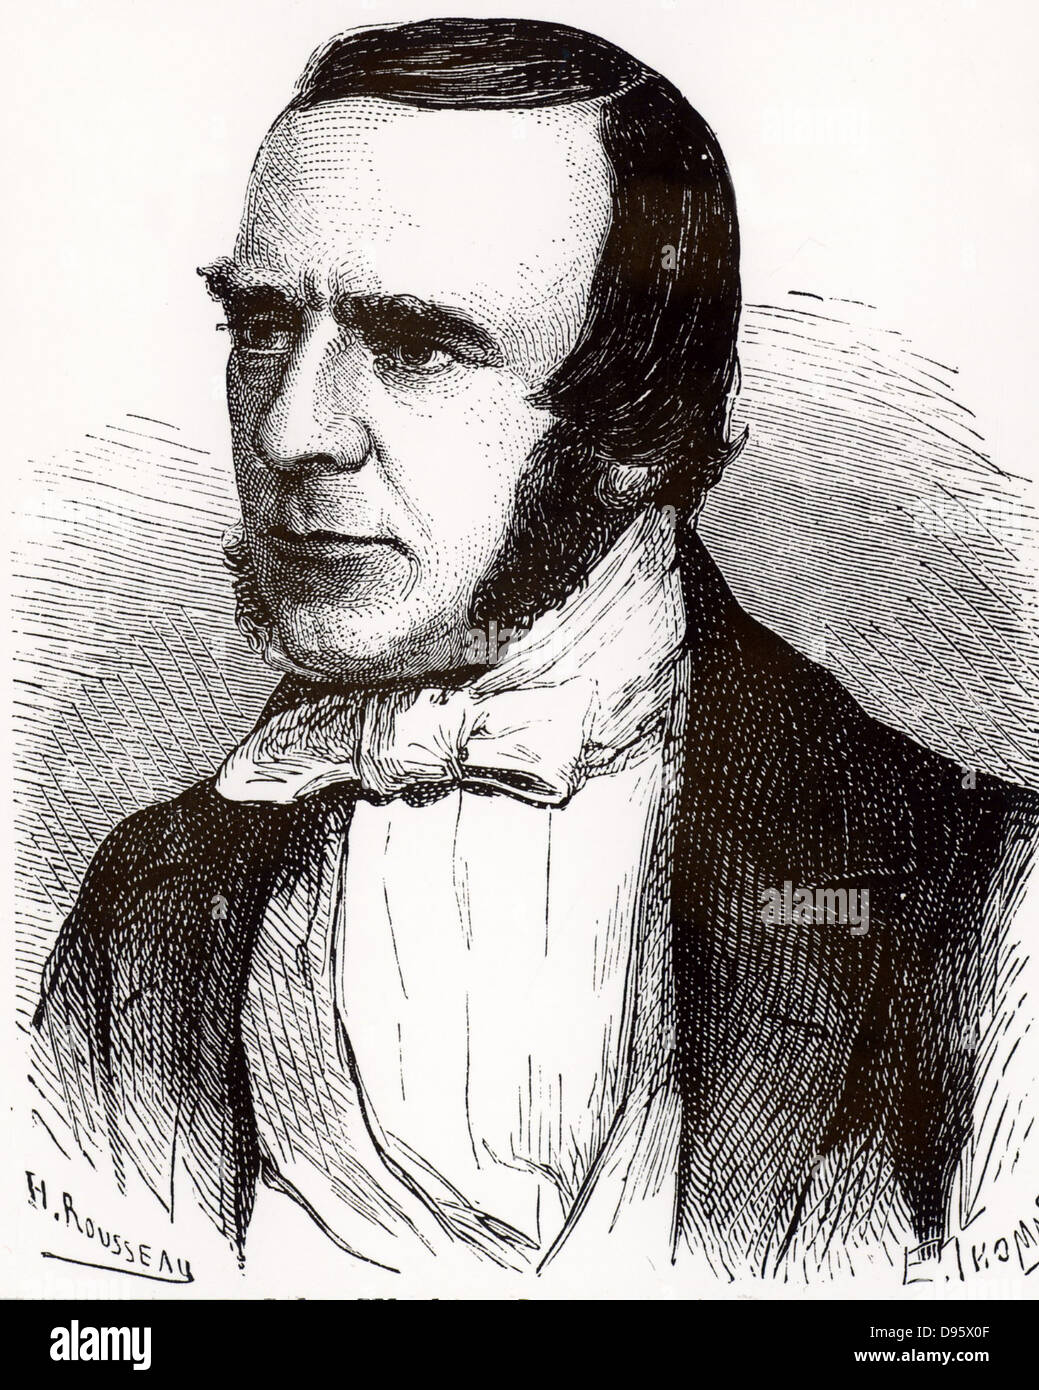 John Watkins Brett (1805-1863) English telegraph pioneer who, with his brother Jacob, founded the General Oceanic Electric Telegraph Company (1845). Engraving from 'Les Merveilles de la Science' by Louis Figuier (Paris, c1870). Stock Photo